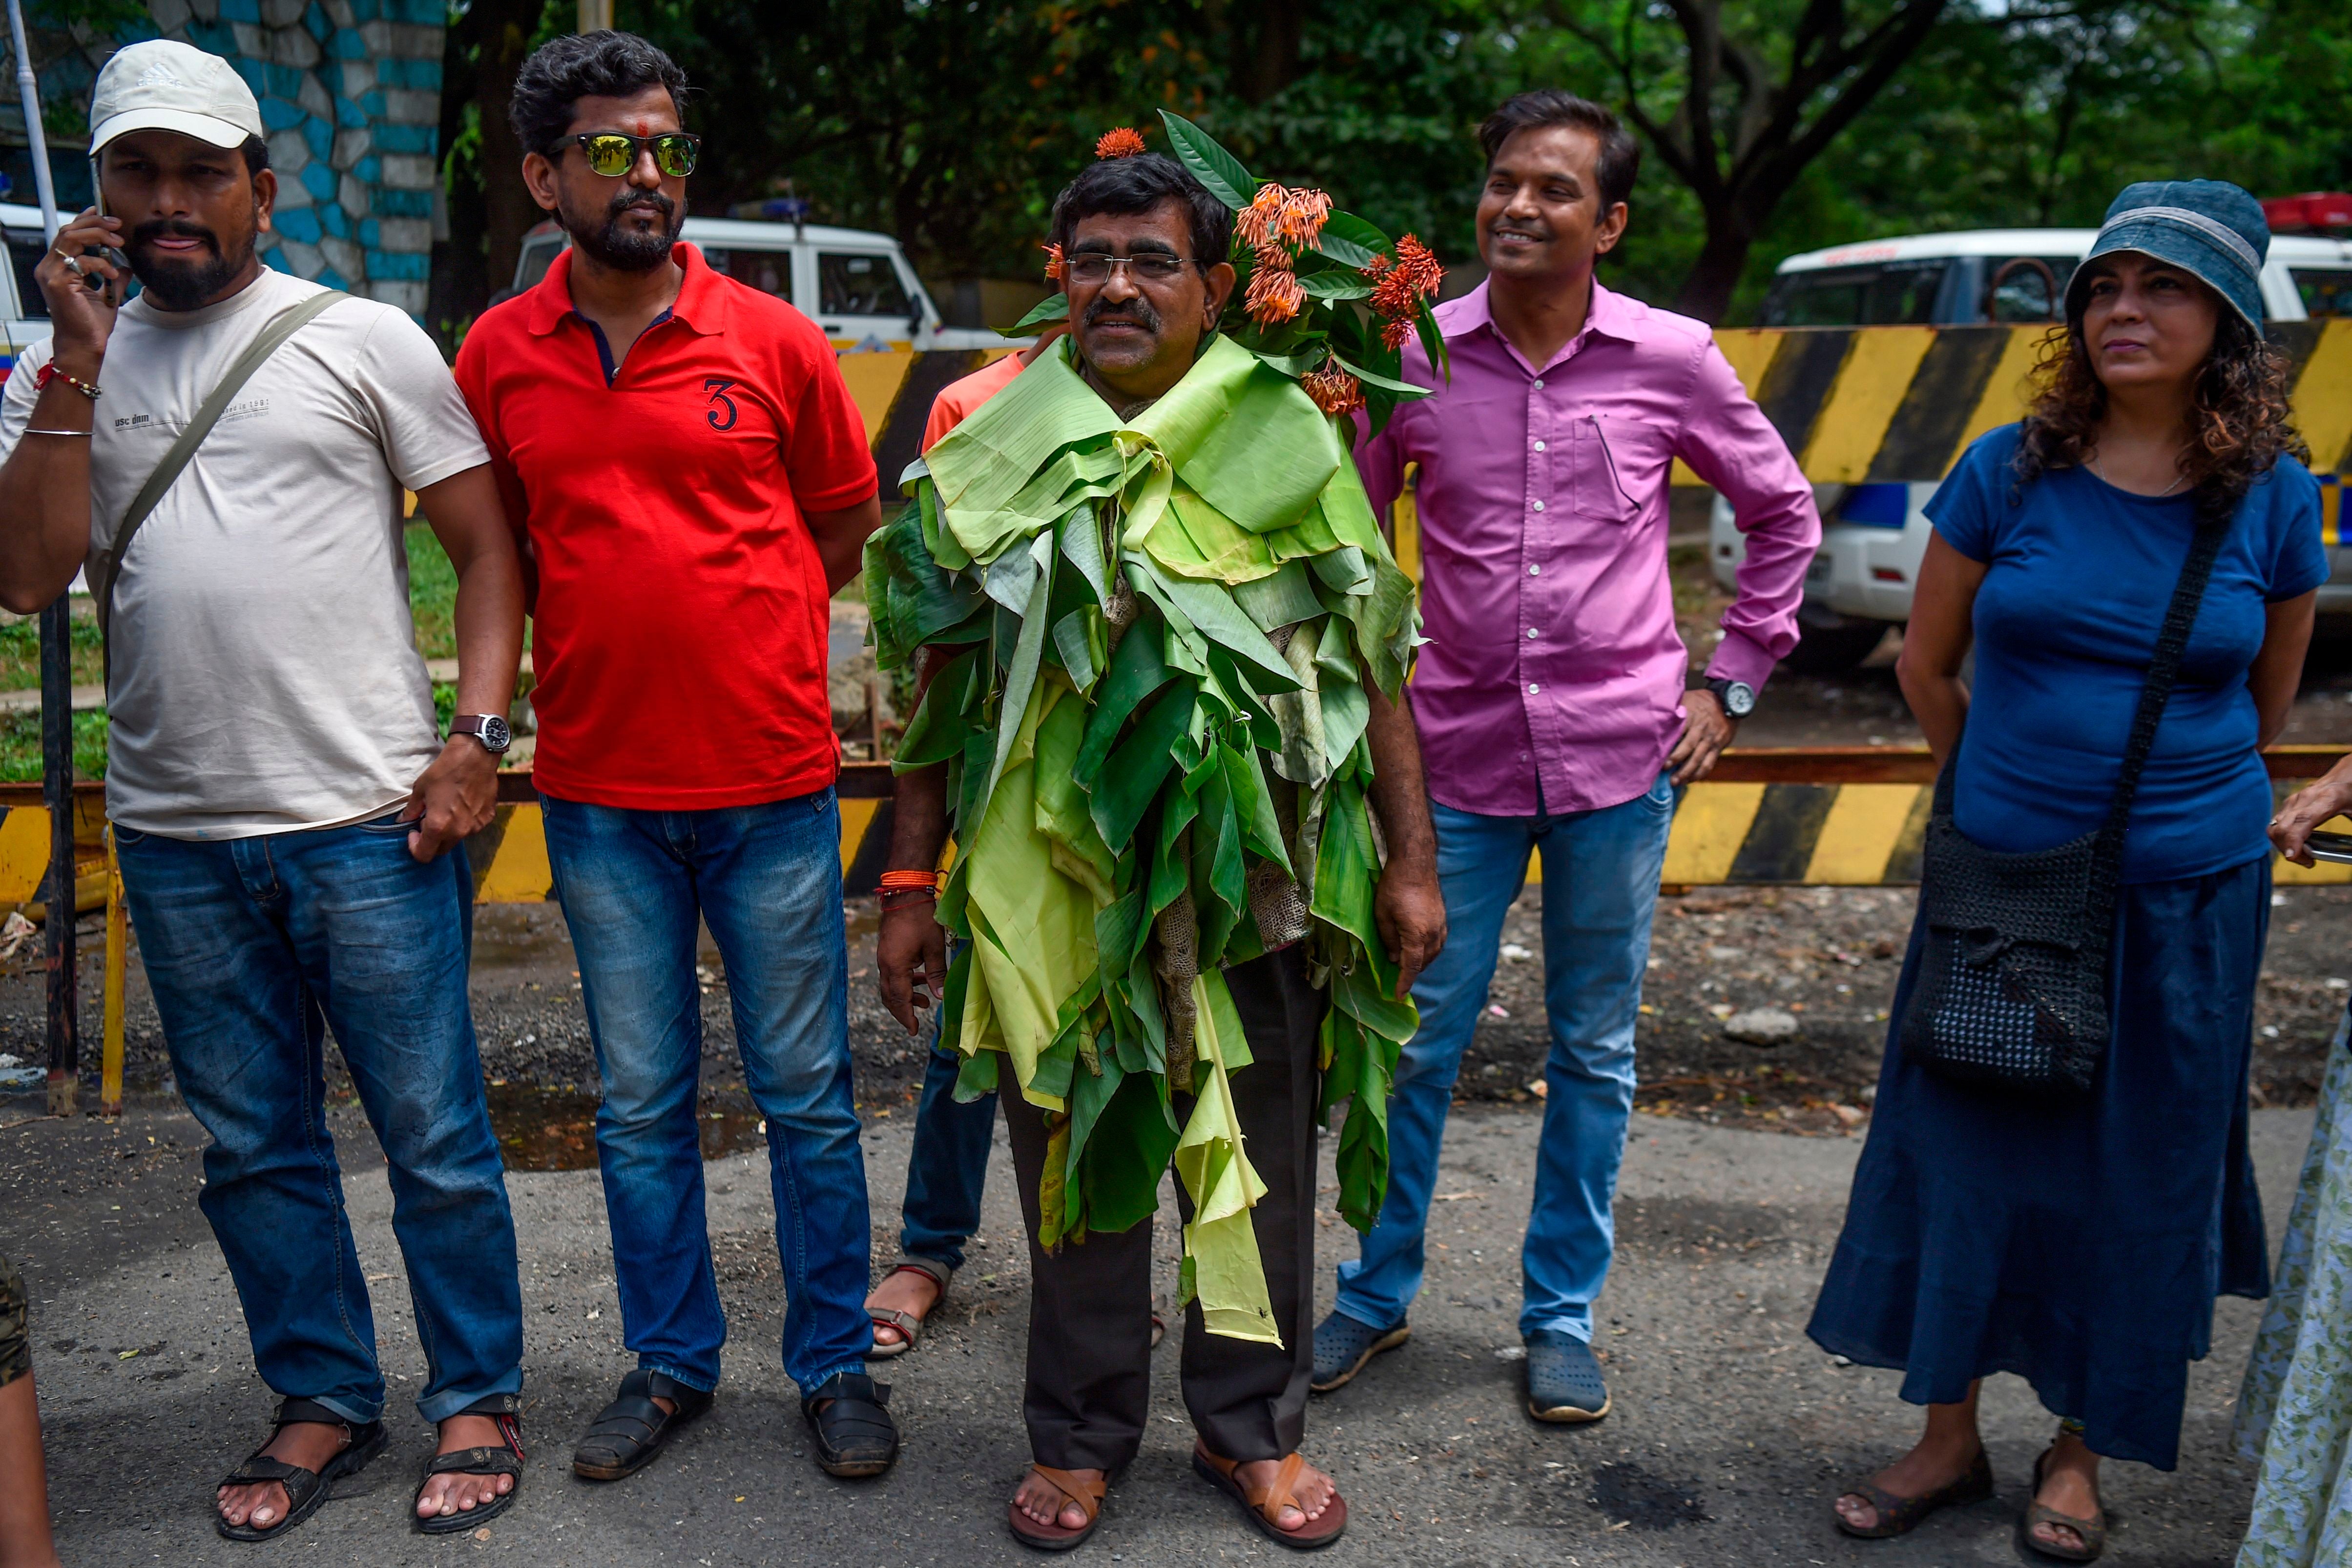 Activist Dadarao Bilhore stands wearing a dress made from banana leaves and flowers found in the Aarey forest as he protests against the destruction of Aarey forest which they call ‘Mumbai’s Amazon’